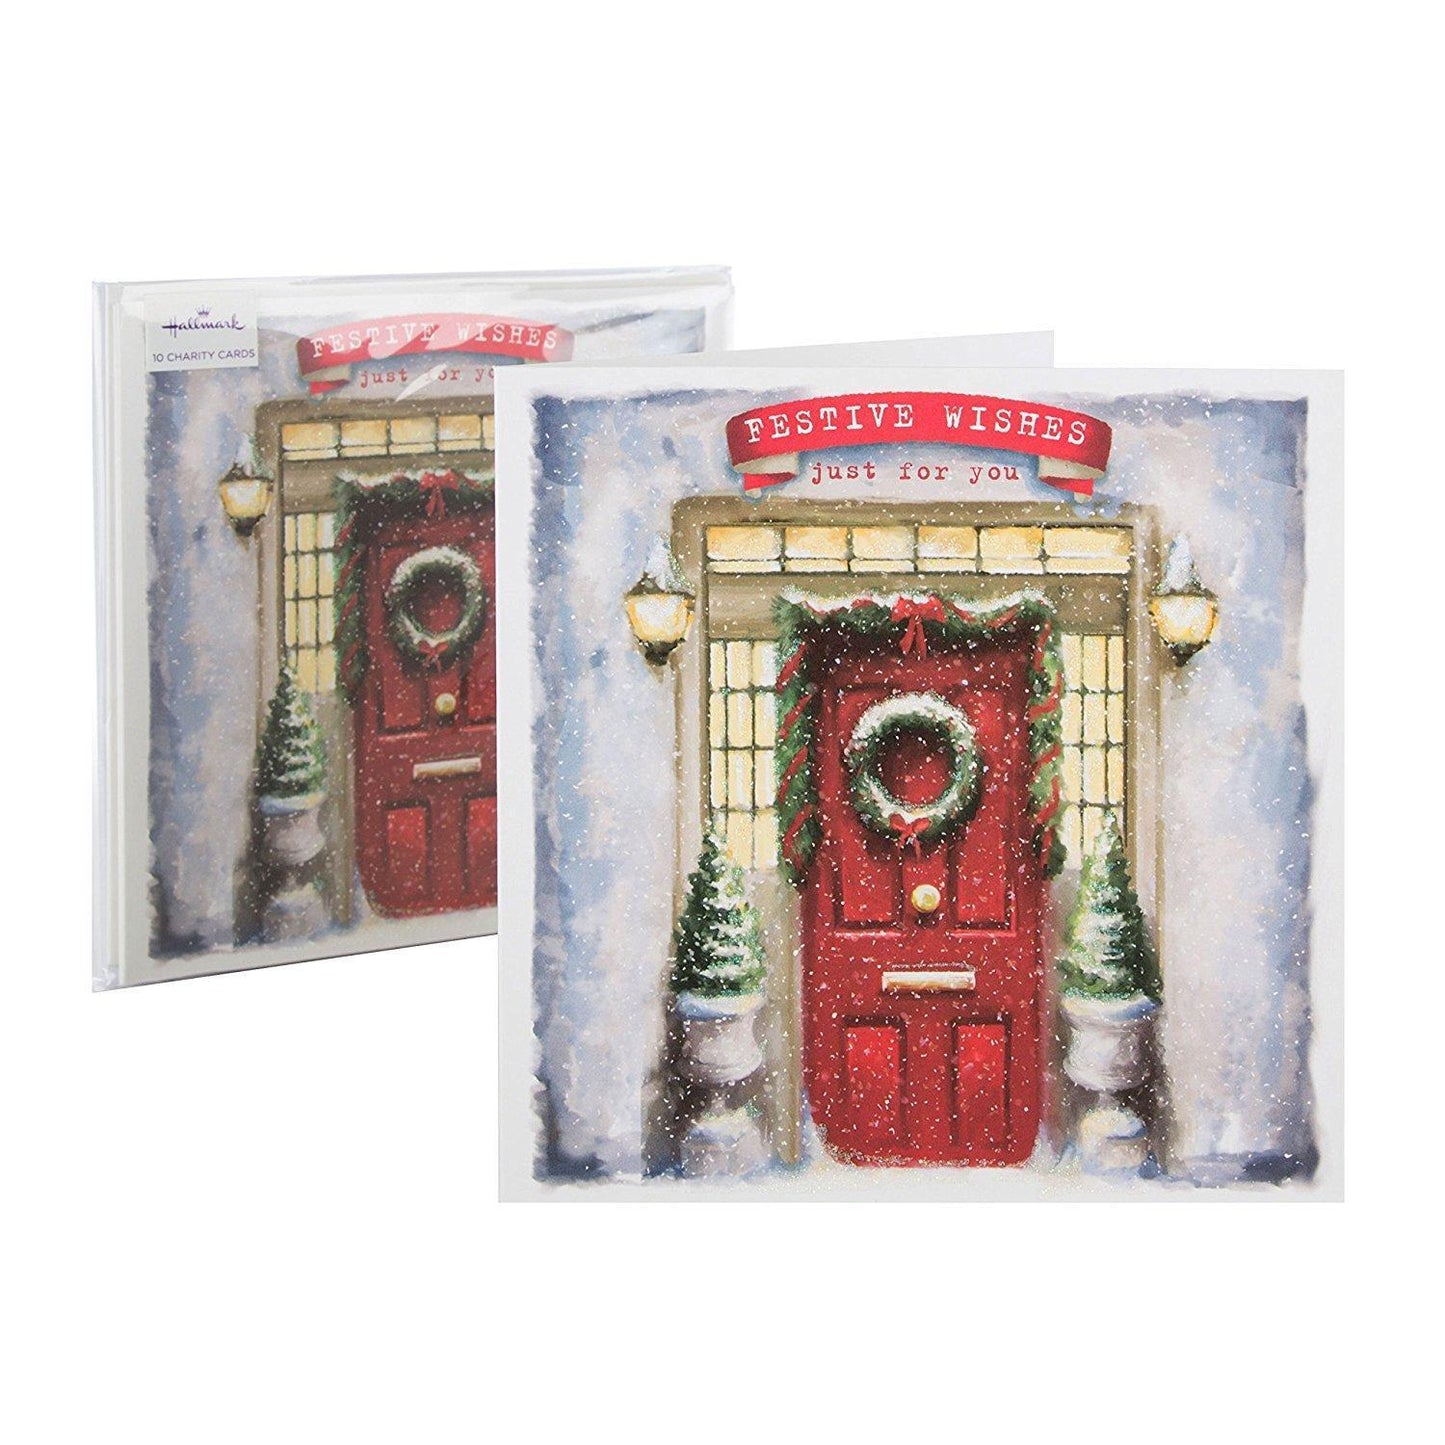 Hallmark Christmas Charity Card Pack "Festive Wishes" - Pack of 10 